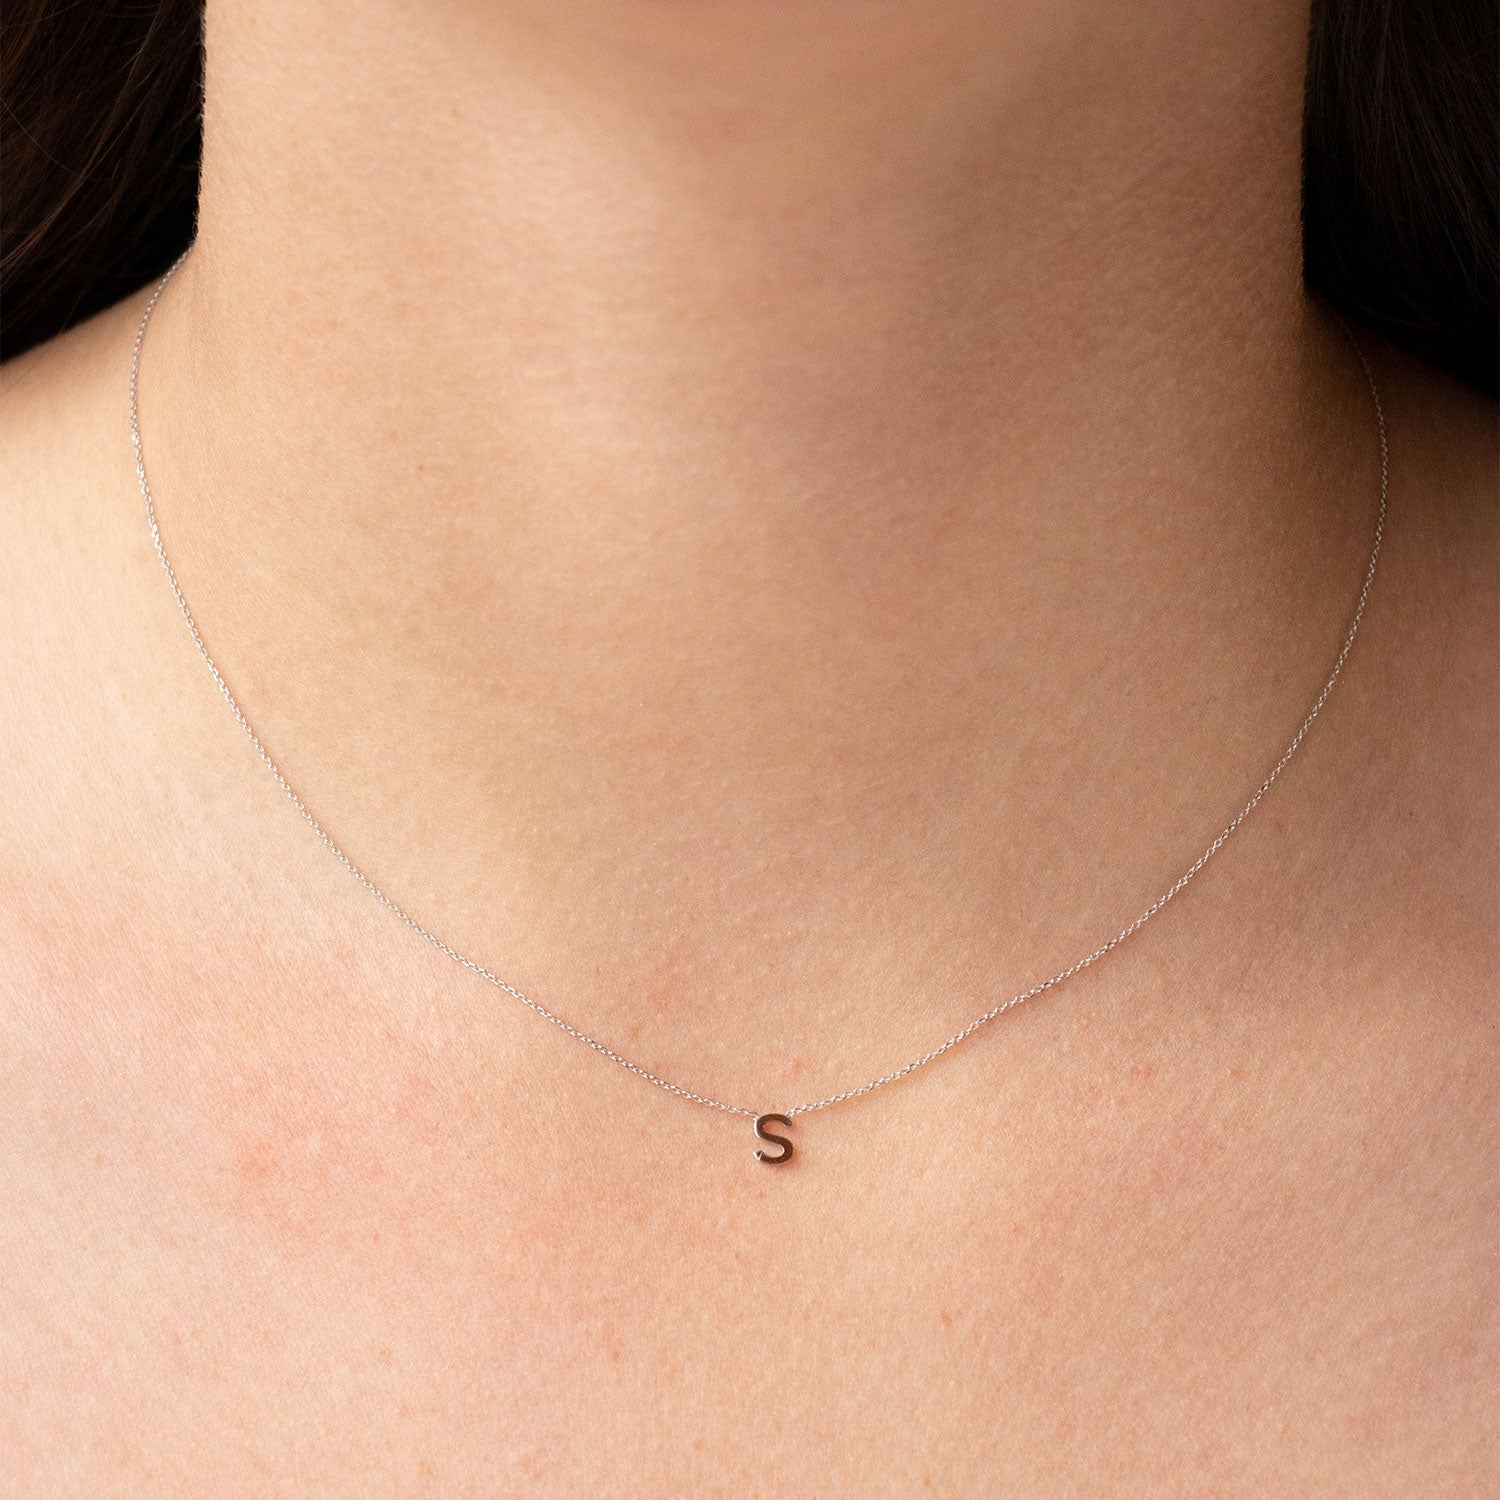 9ct White Gold 'S' Initial Adjustable Letter Necklace 38/43cm